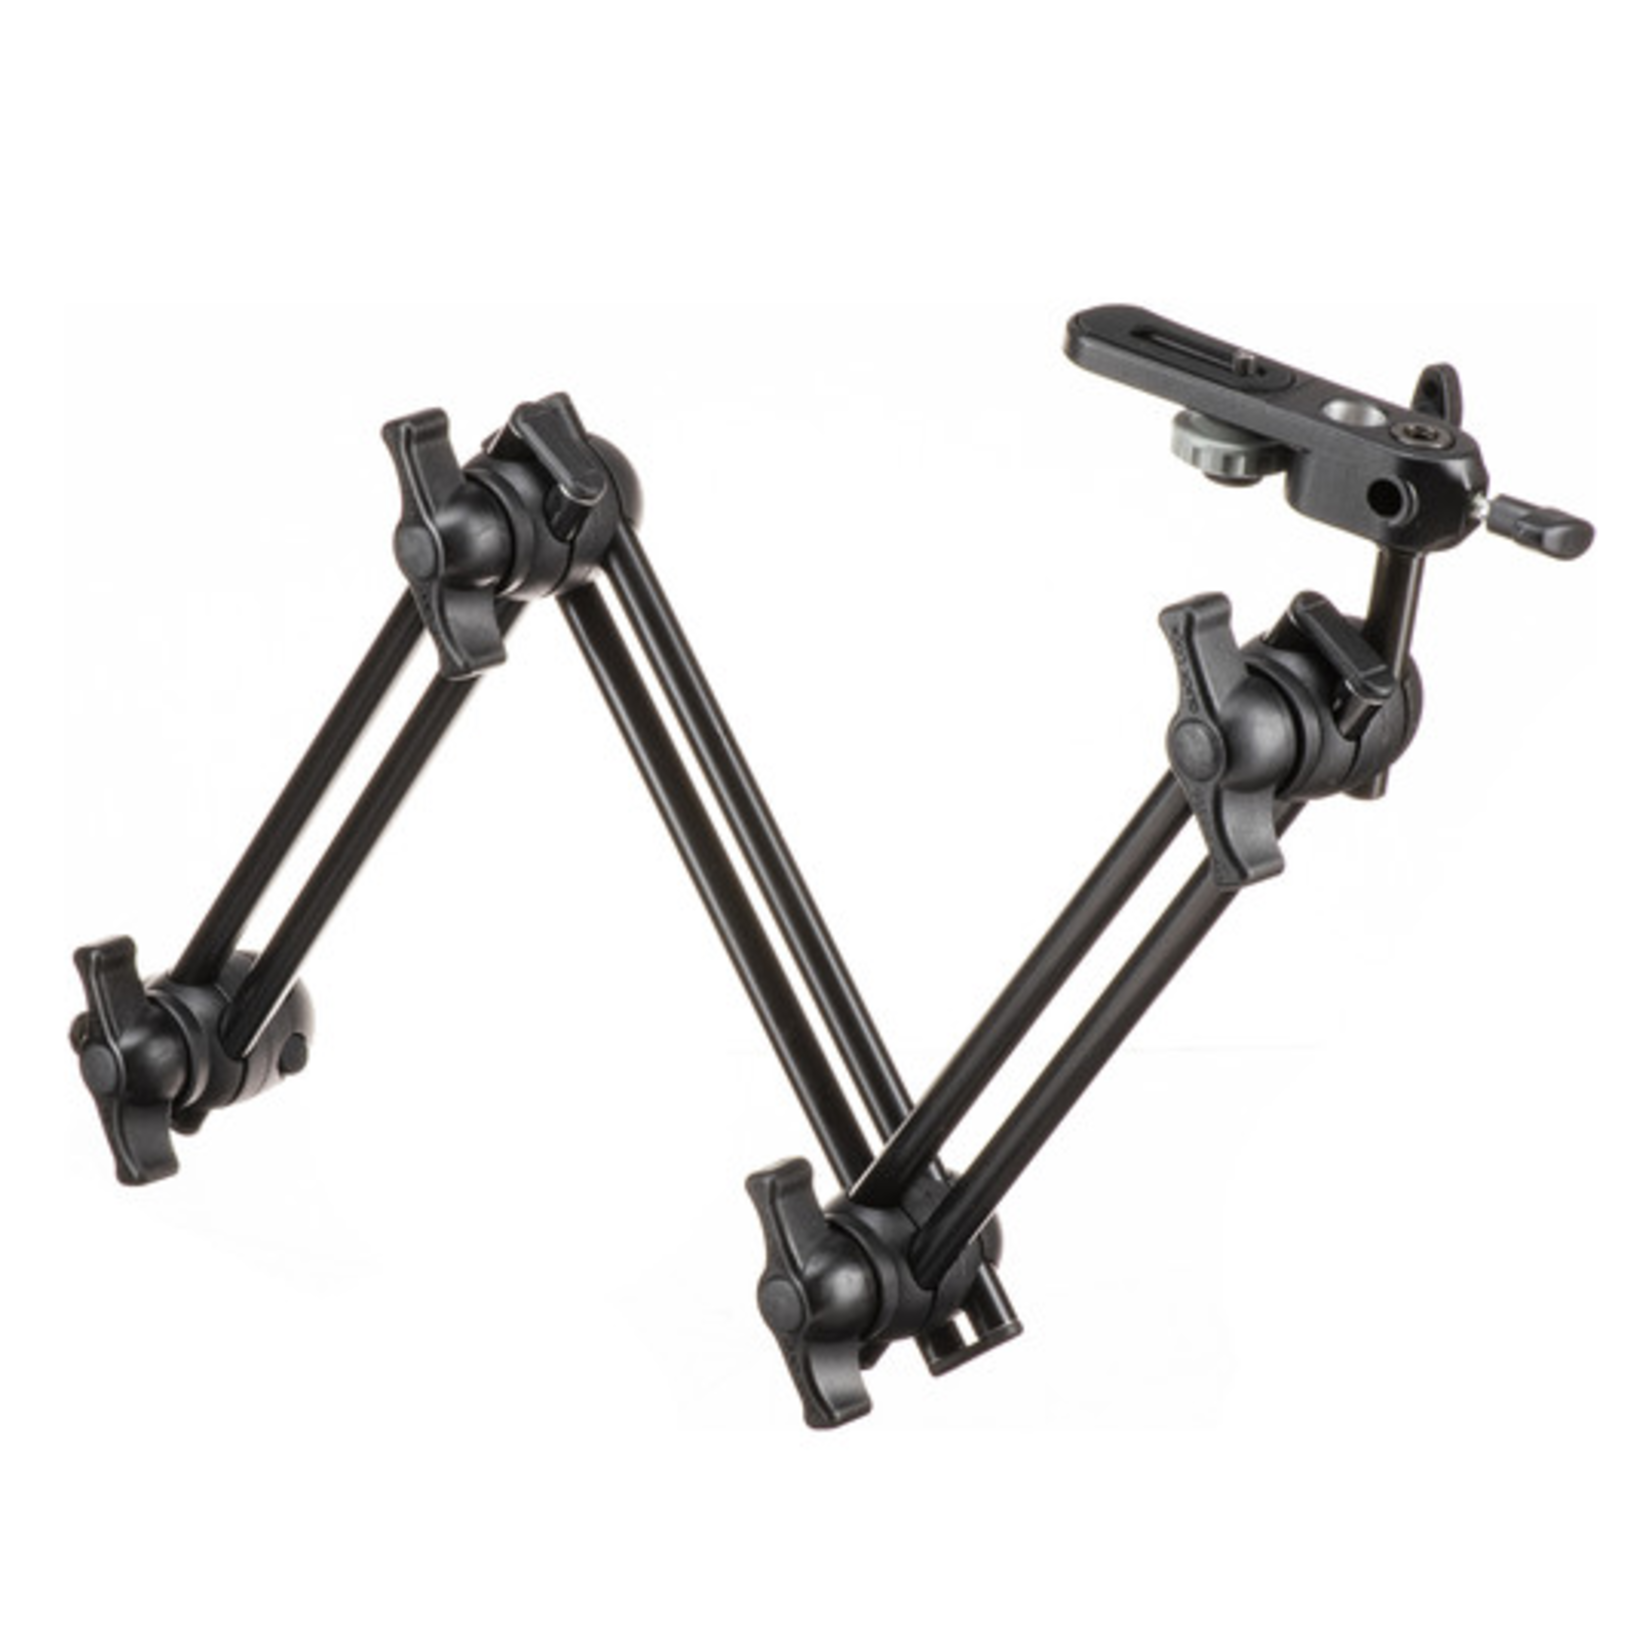 Manfrotto Manfrotto Double Articulated Arm - 3 Sections With Camera Bracket